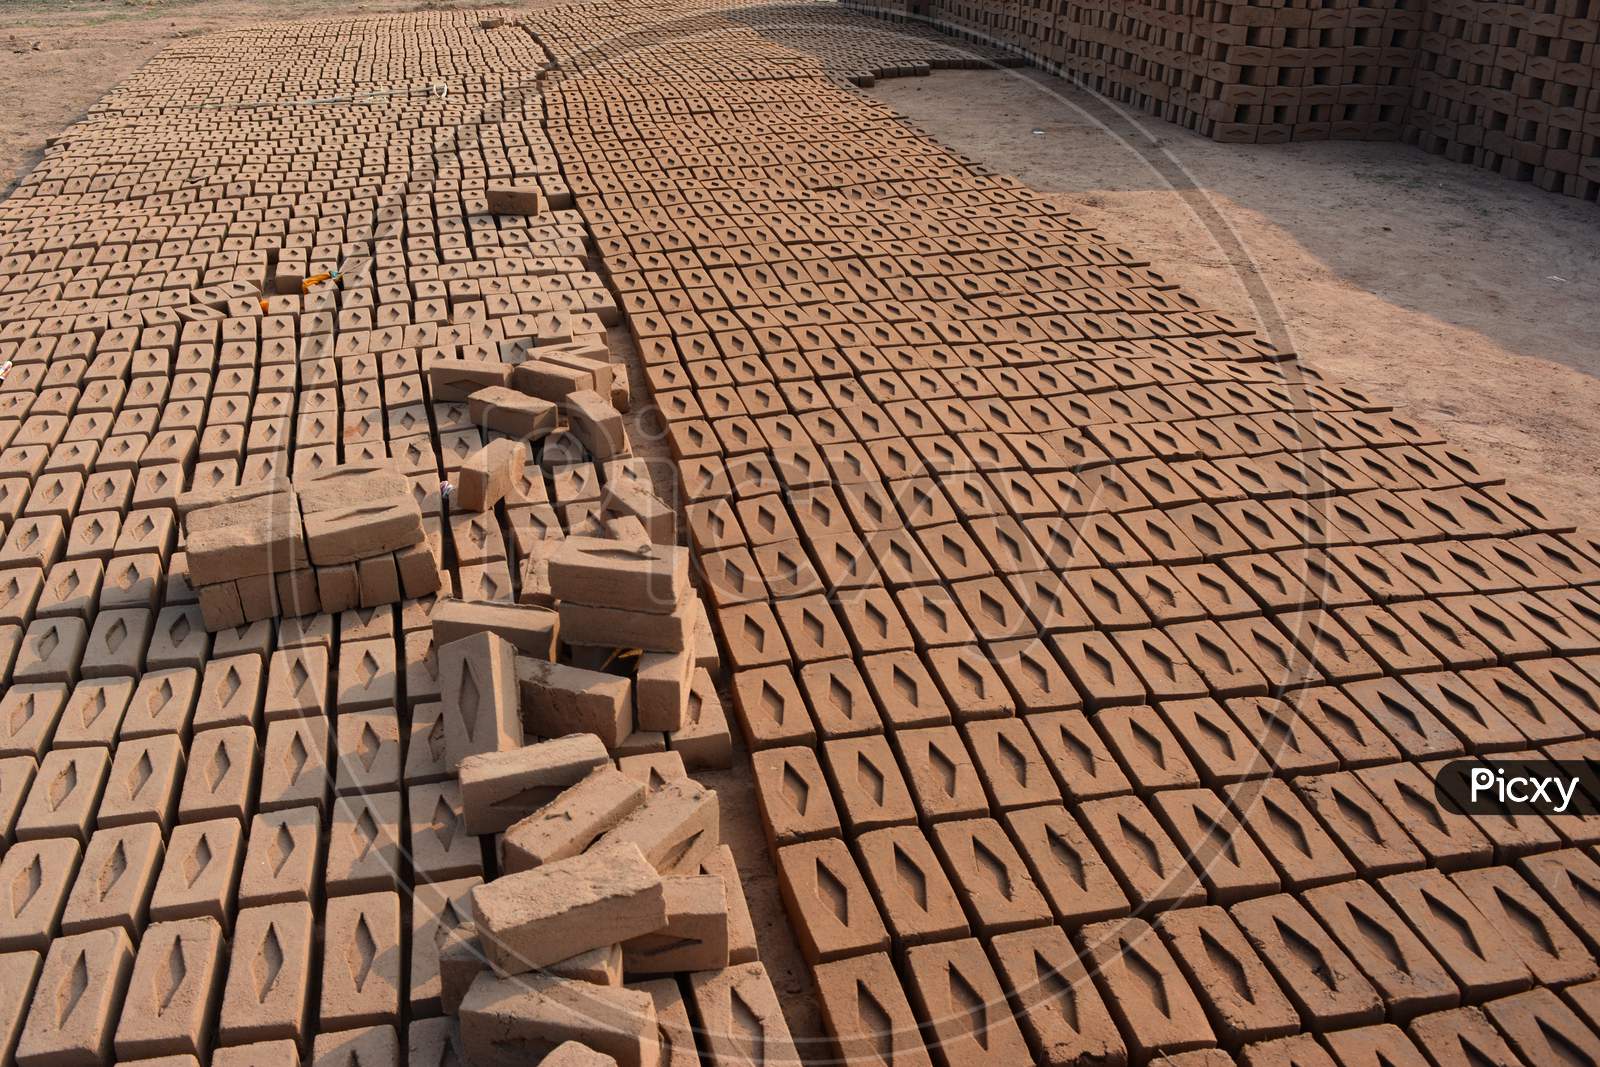 Raw brick laid out in stacks for drying. Bricks in a brick factory. Traditional production of clay bricks in India.